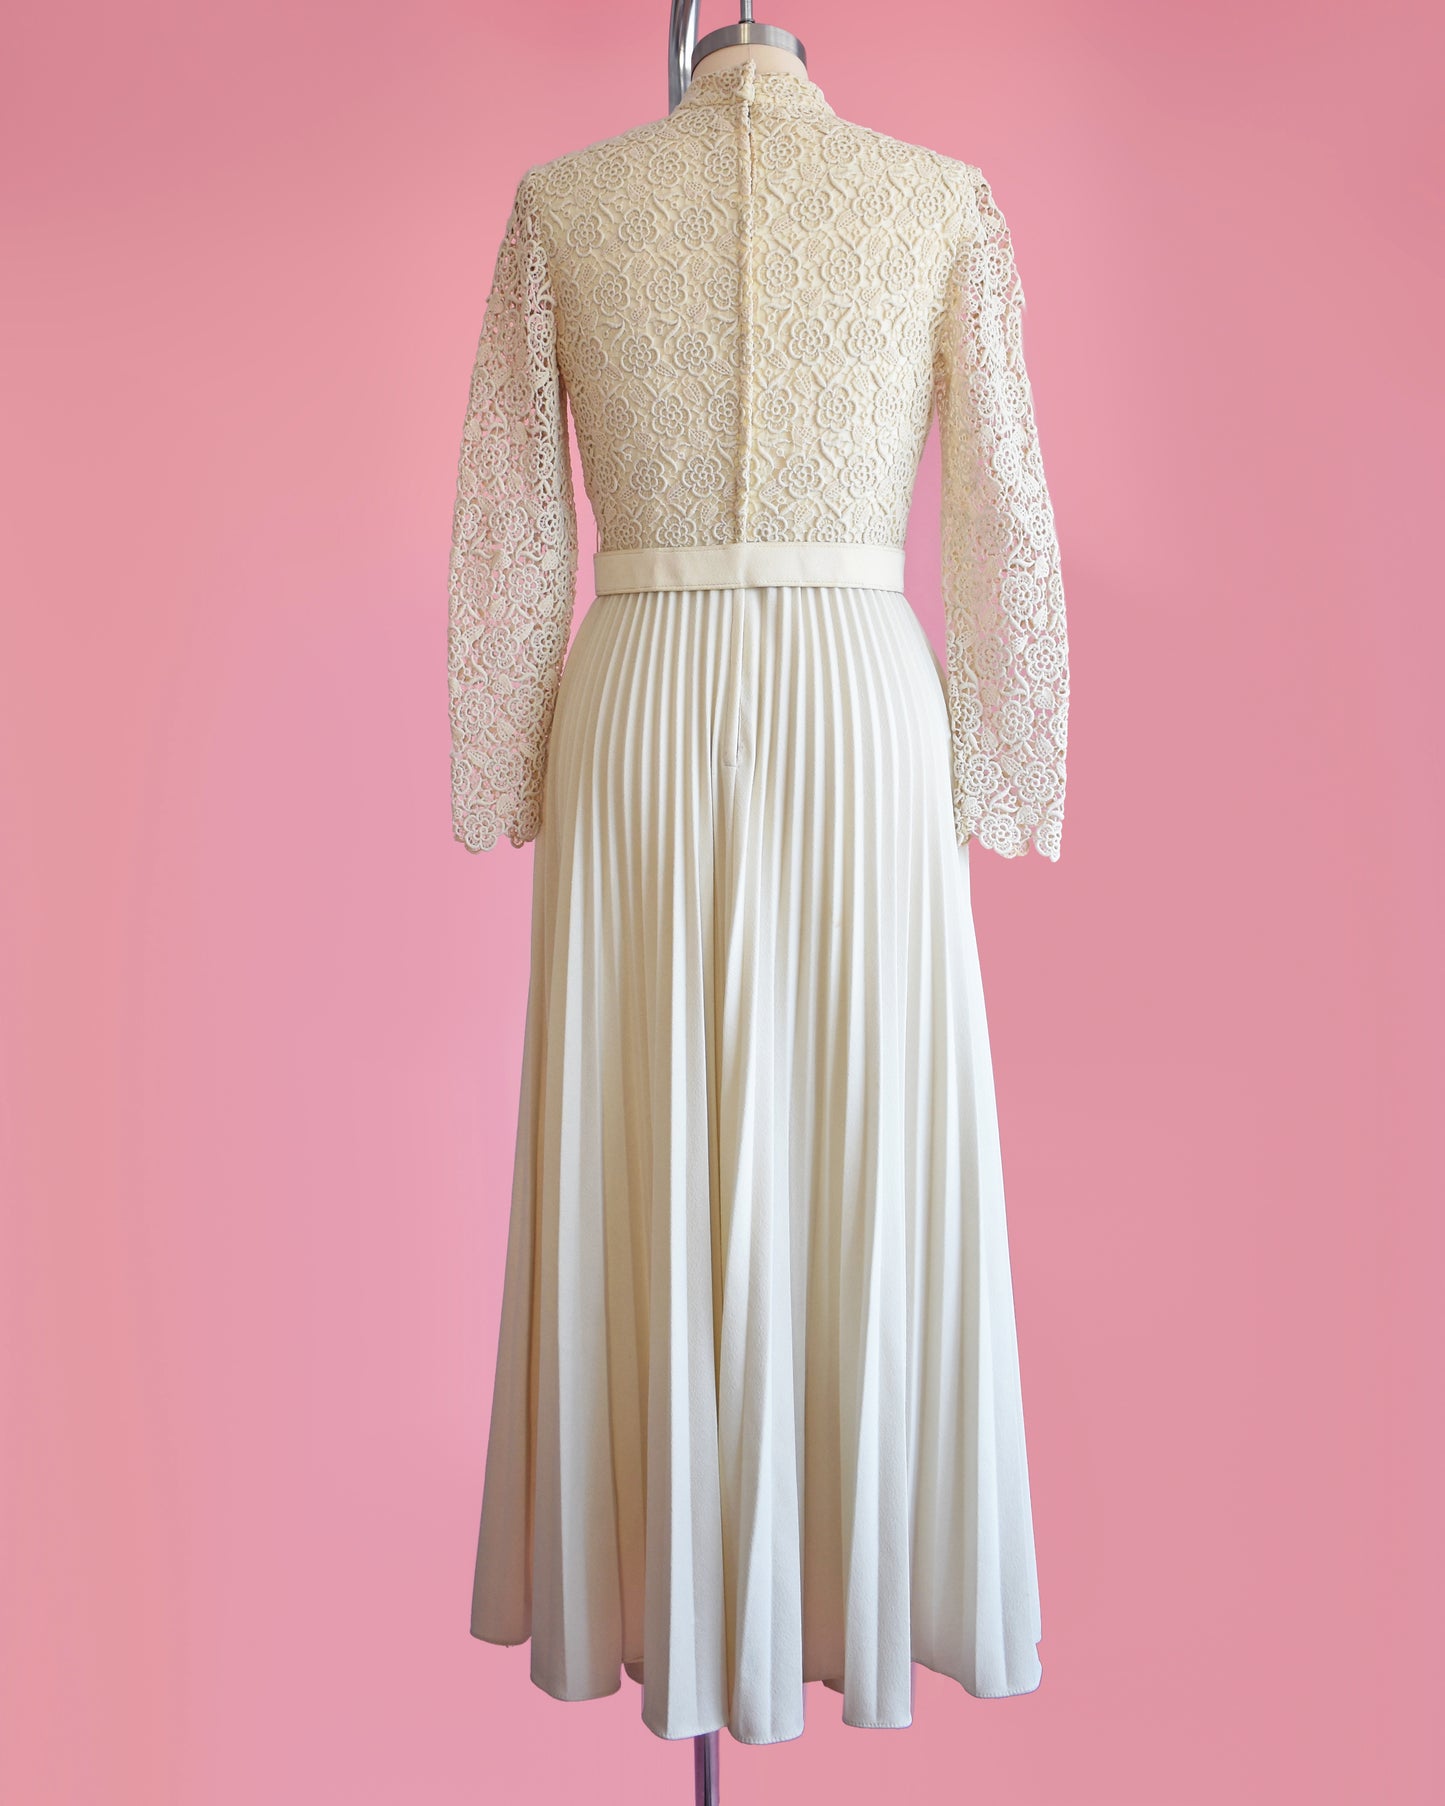 back view of a vintage 1970s crochet floral lace pleated maxi dress with matching belt